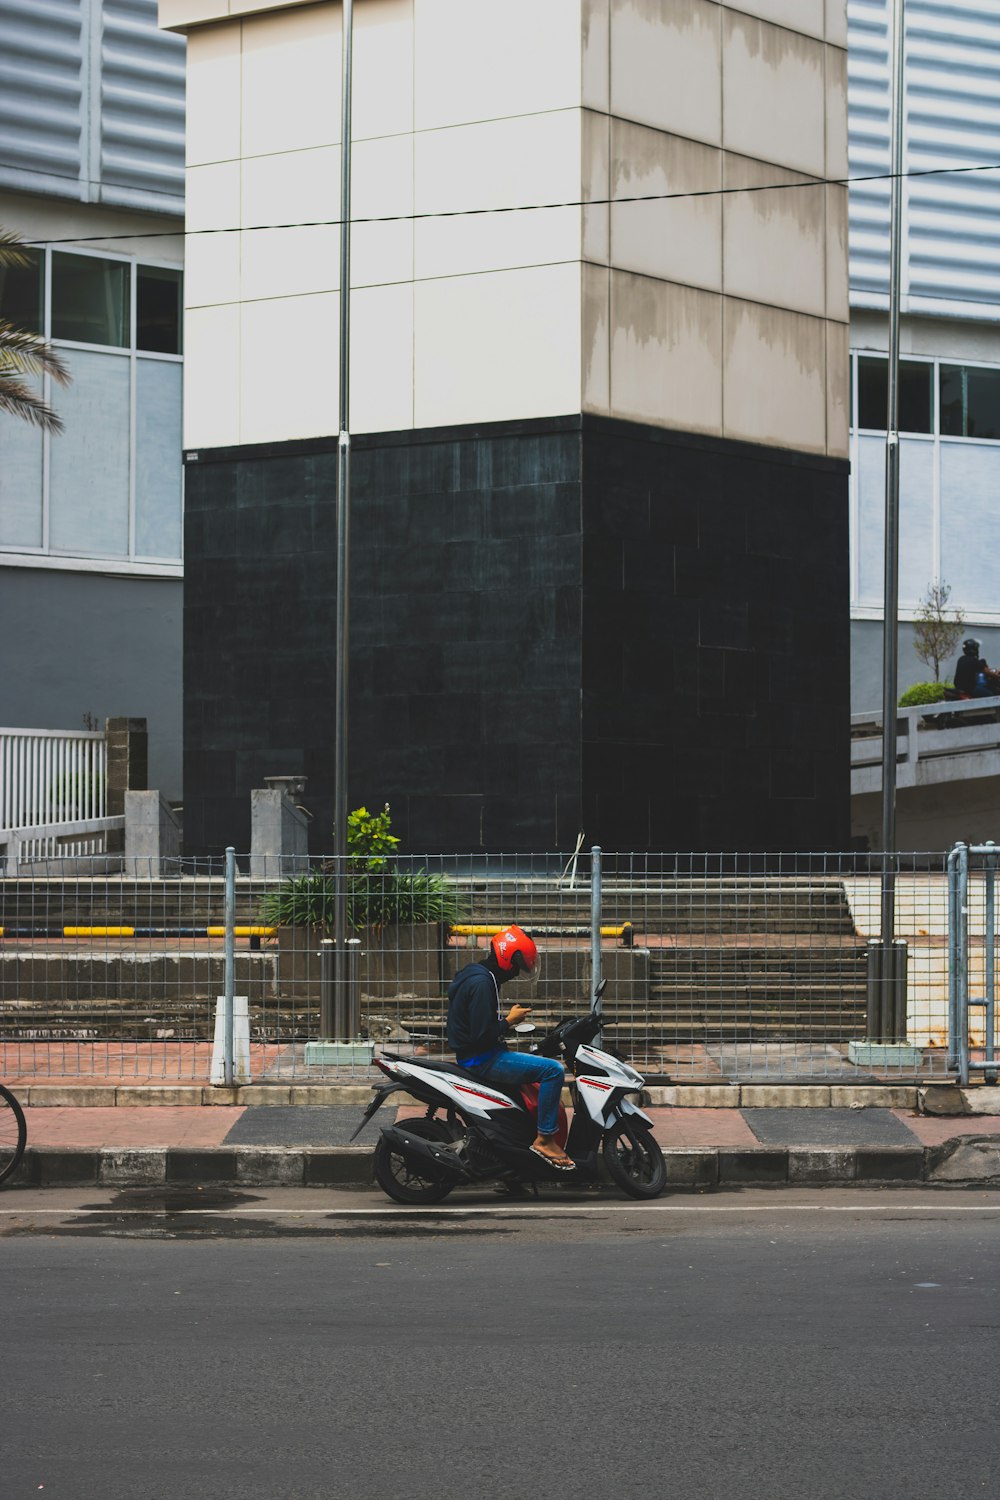 man sitting on motorcycle scooter while holding smartphone